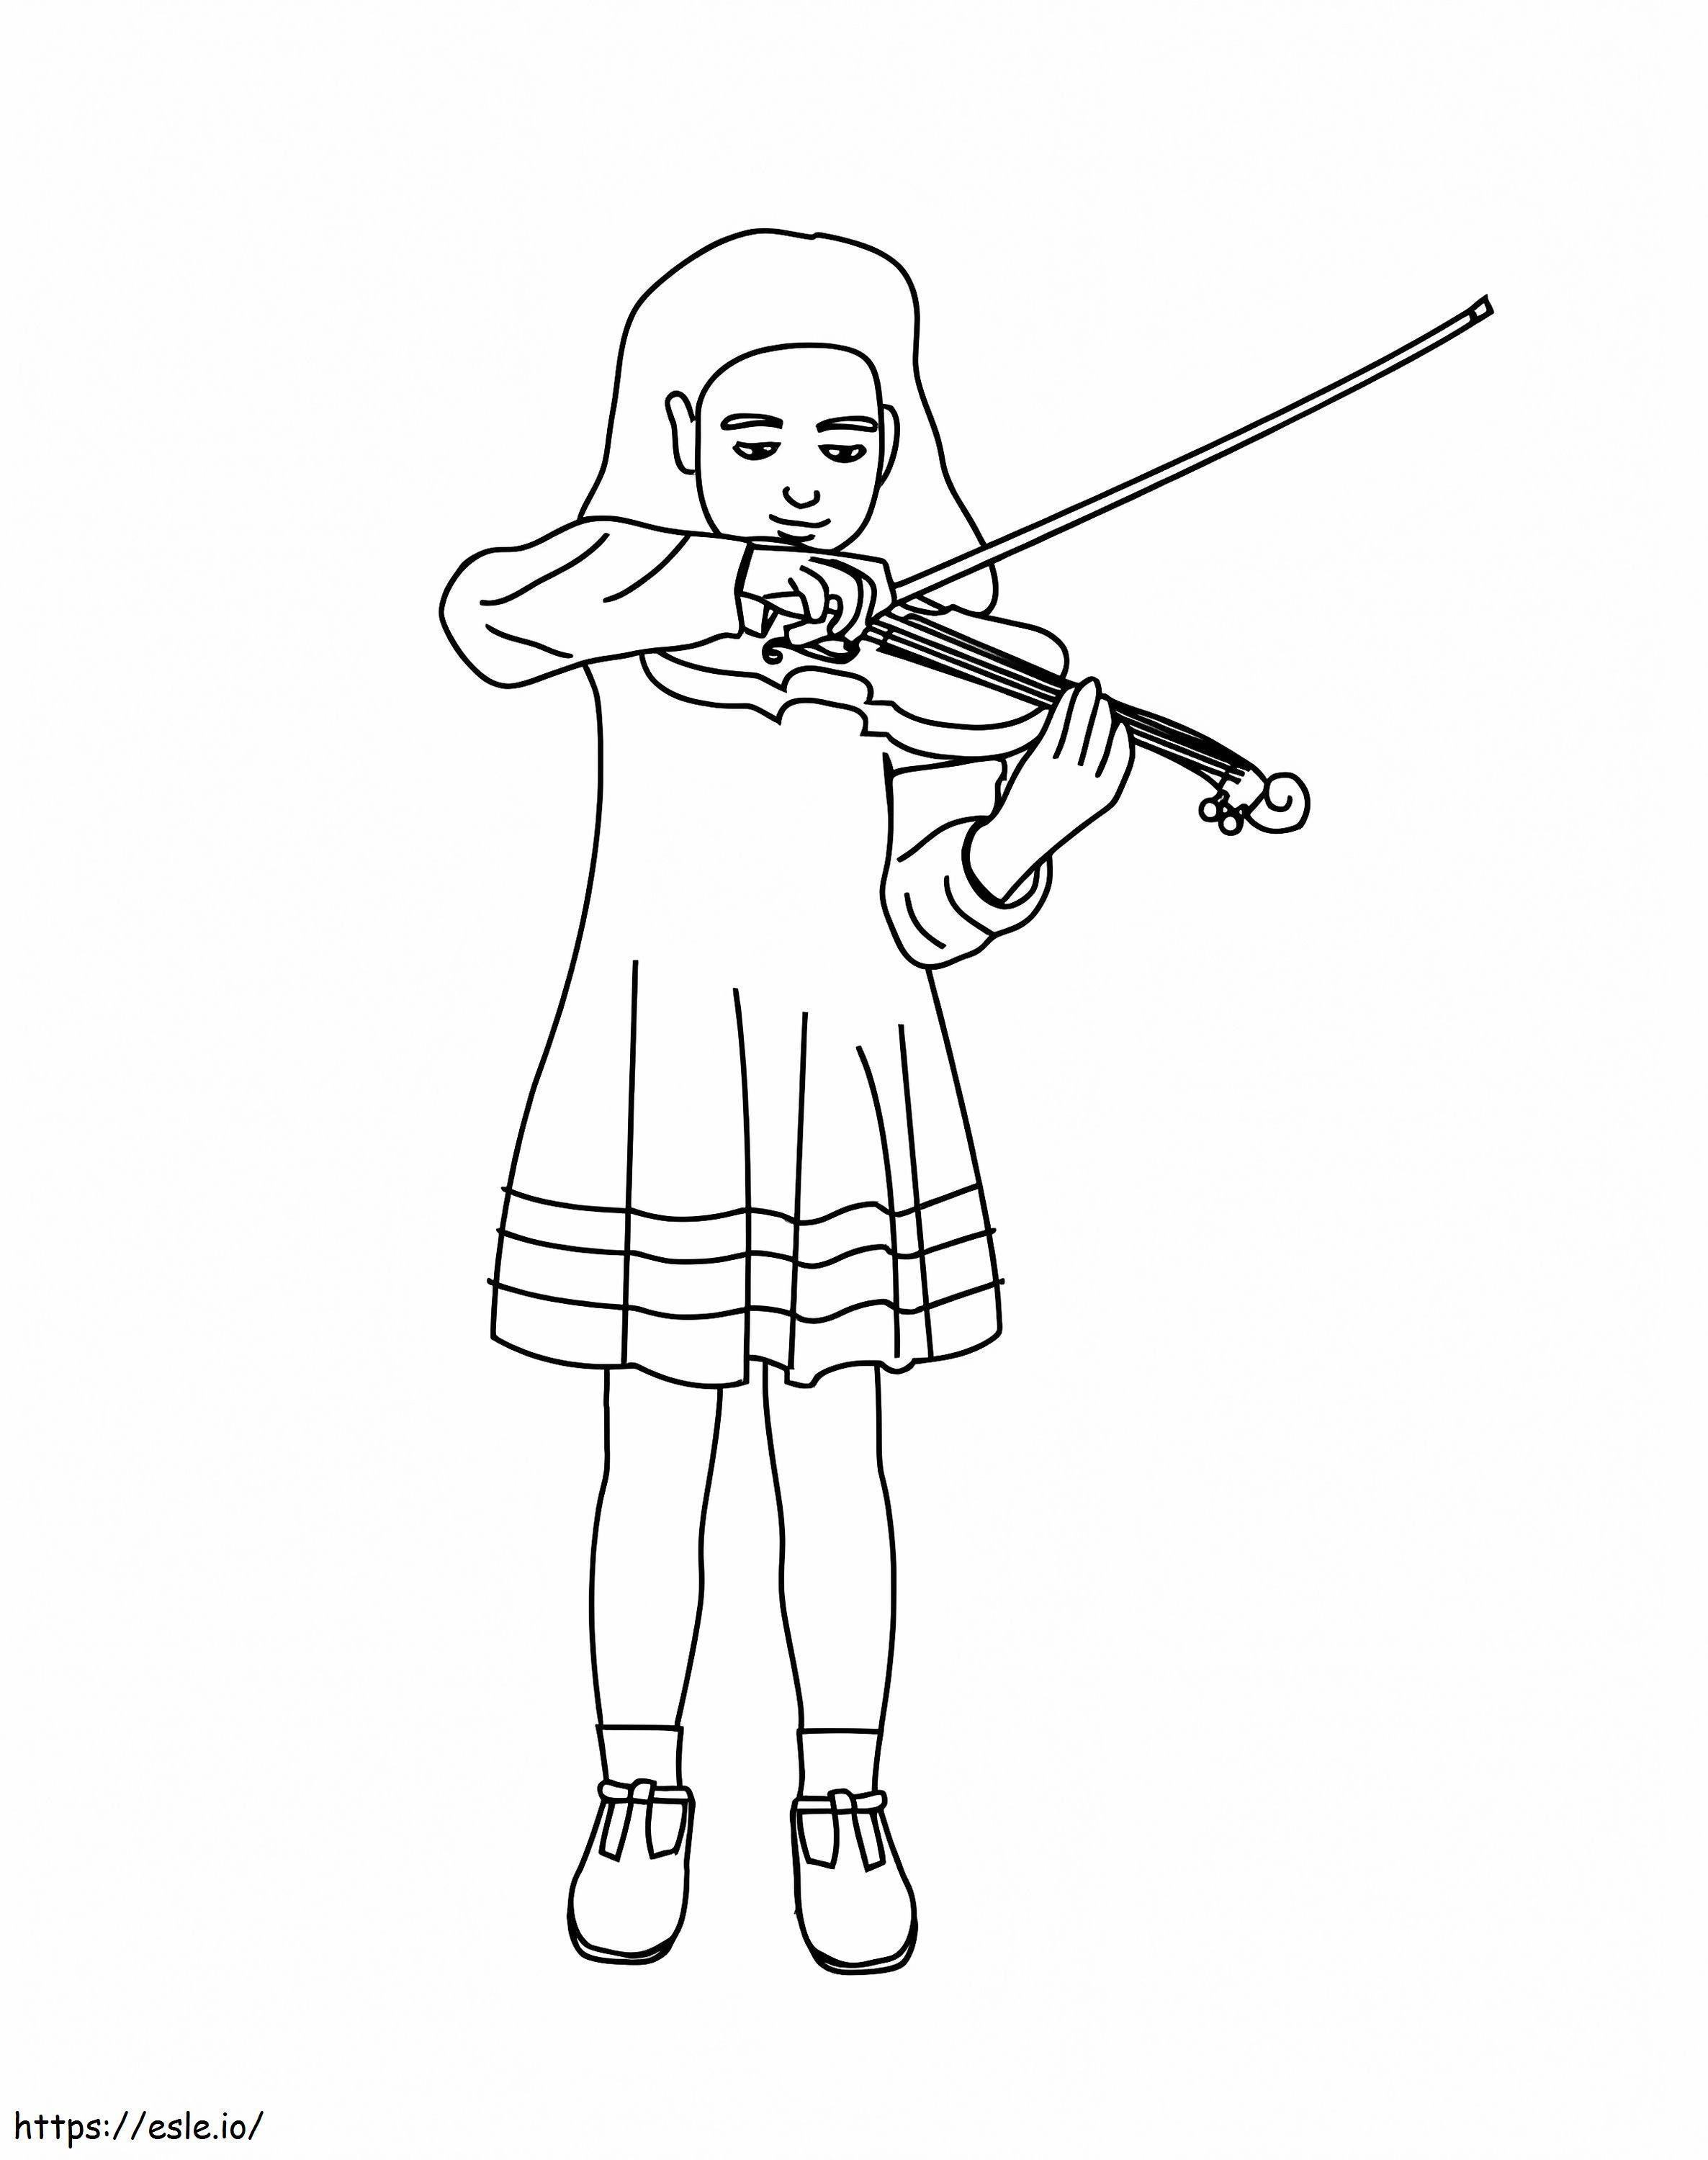 Girls Play The Violin coloring page